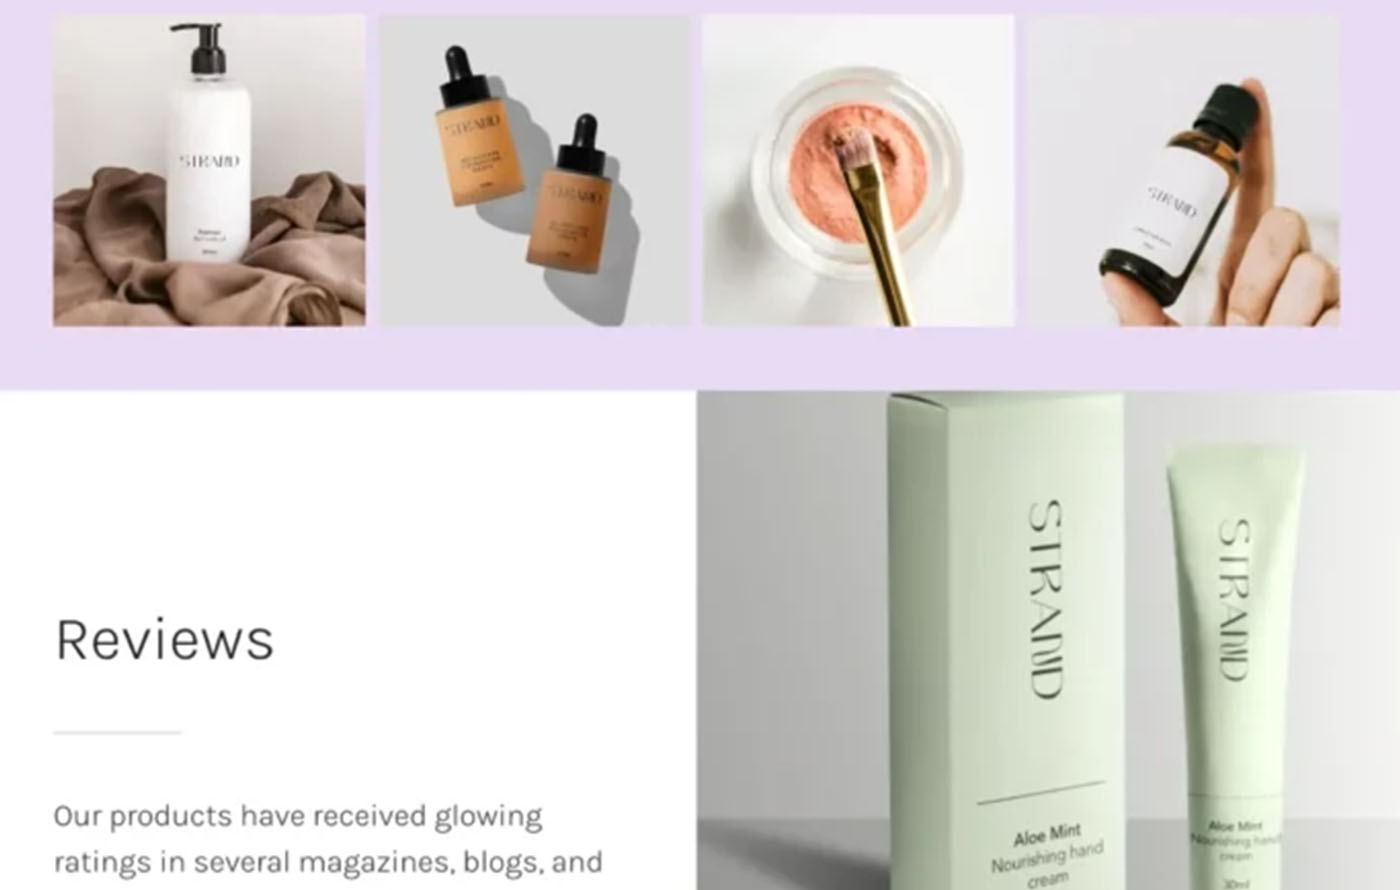 Skincare - Cosmetic Shopify template built by Shogun